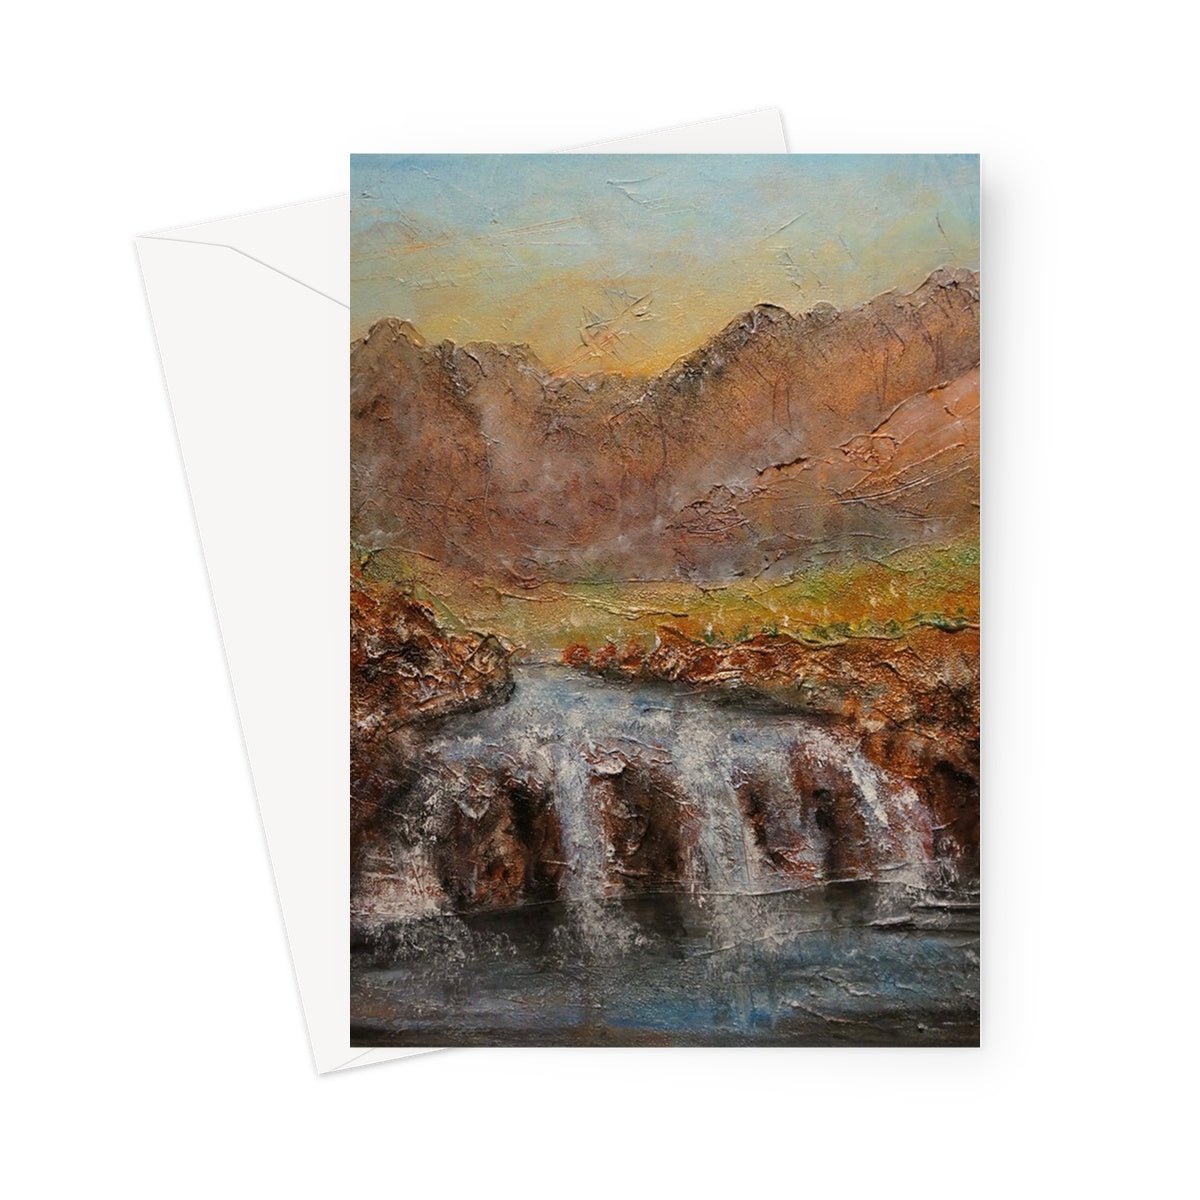 Fairy Pools Dawn Skye Art Gifts Greeting Card-Greetings Cards-Skye Art Gallery-5"x7"-10 Cards-Paintings, Prints, Homeware, Art Gifts From Scotland By Scottish Artist Kevin Hunter